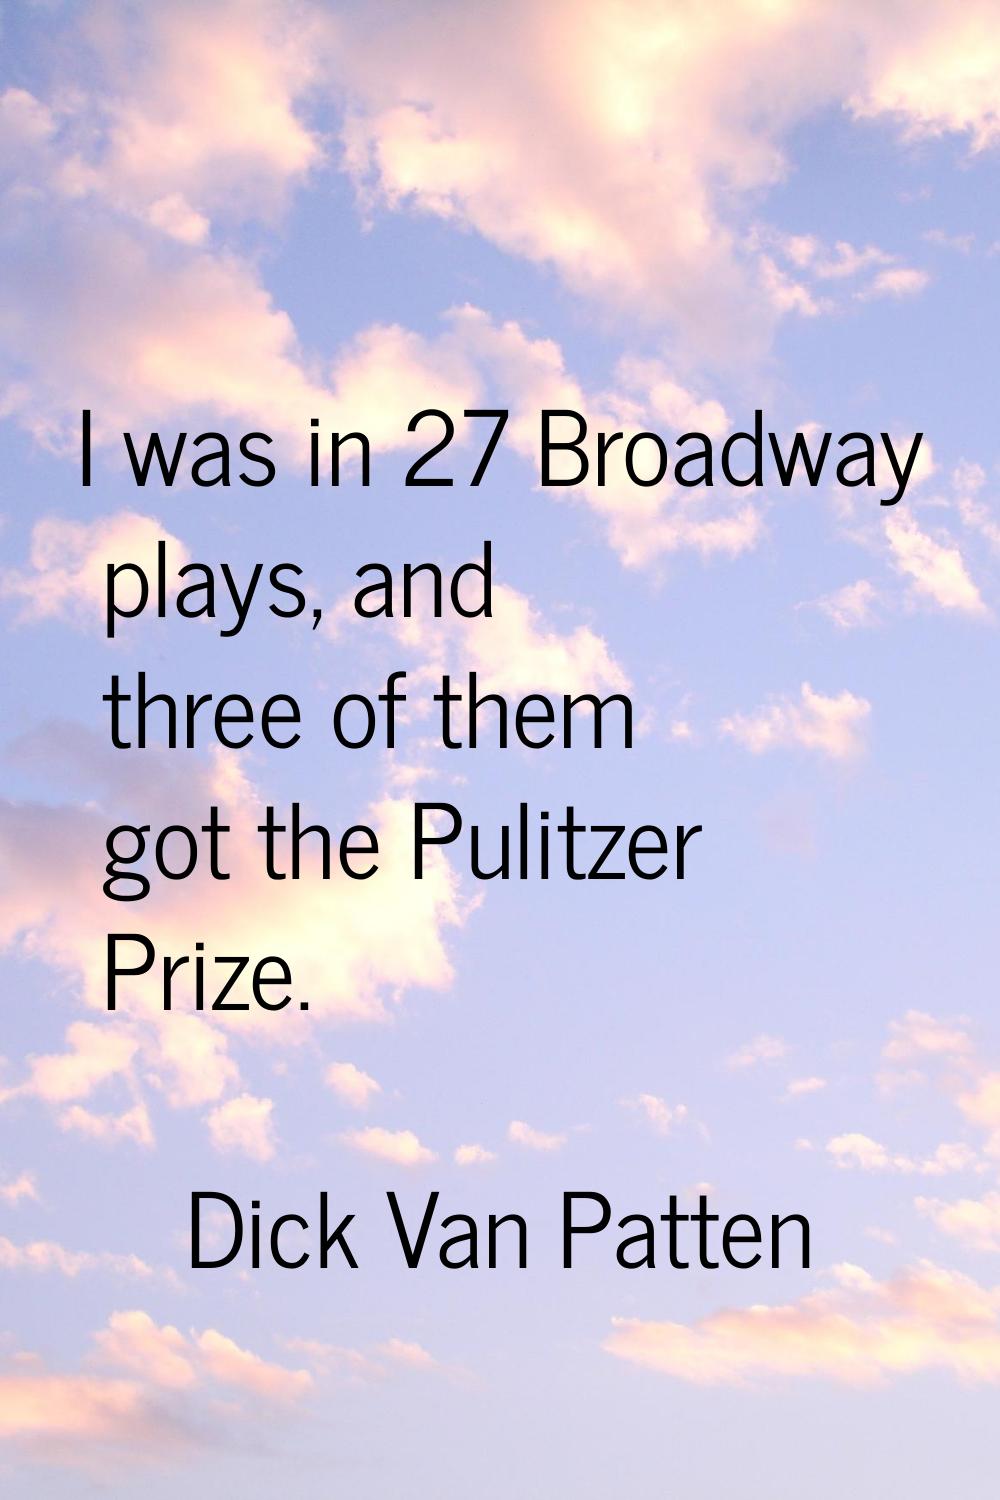 I was in 27 Broadway plays, and three of them got the Pulitzer Prize.